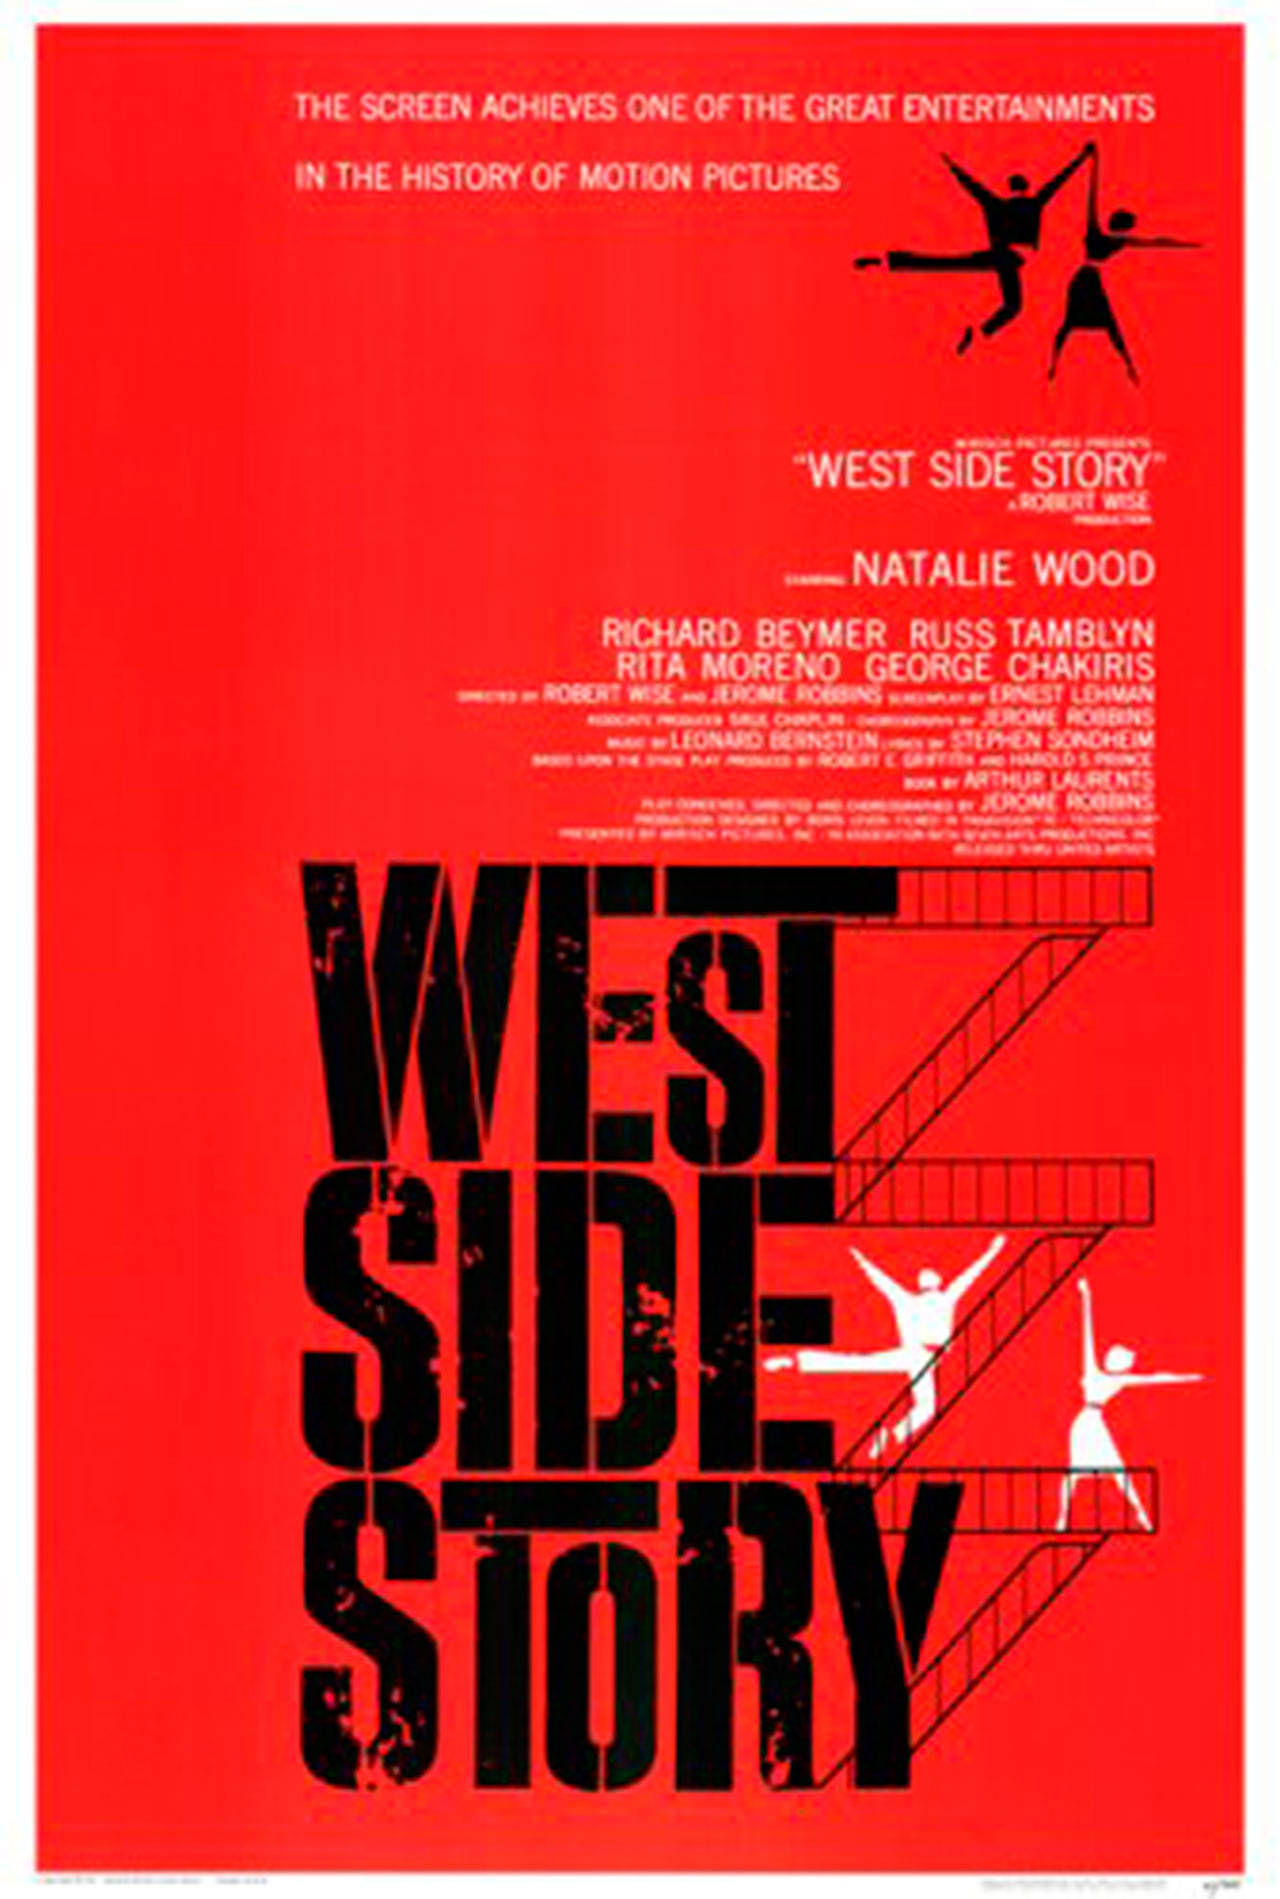 Image courtesy of Bainbridge Cinemas | “West Side Story” (1961) will return to the big screen at Bainbridge Cinemas for a special revival at 7 p.m. Wednesday, June 27.